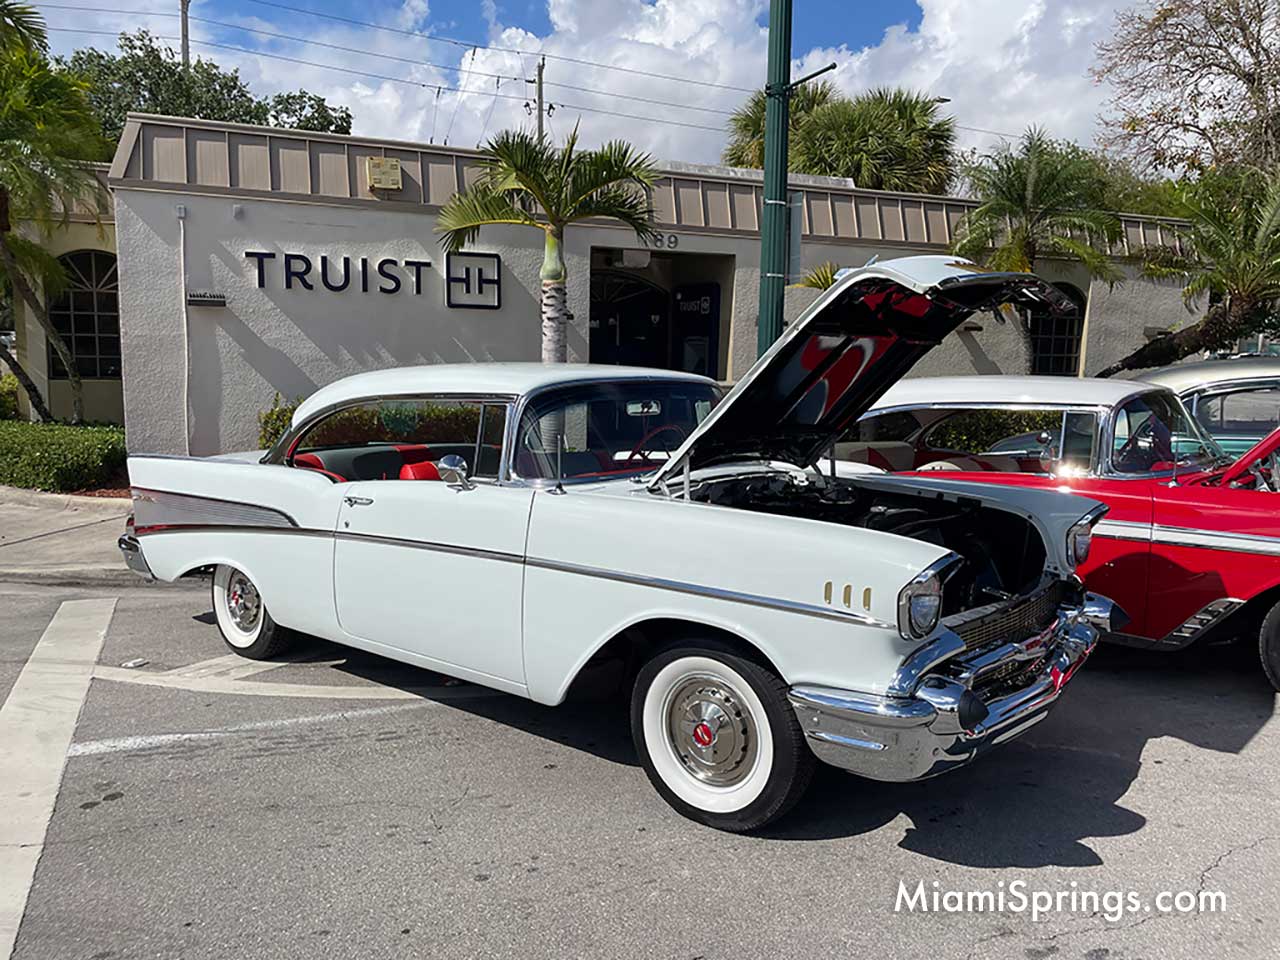 Westward Drive Car Show at the 2023 River Cities Festival in Miami Springs